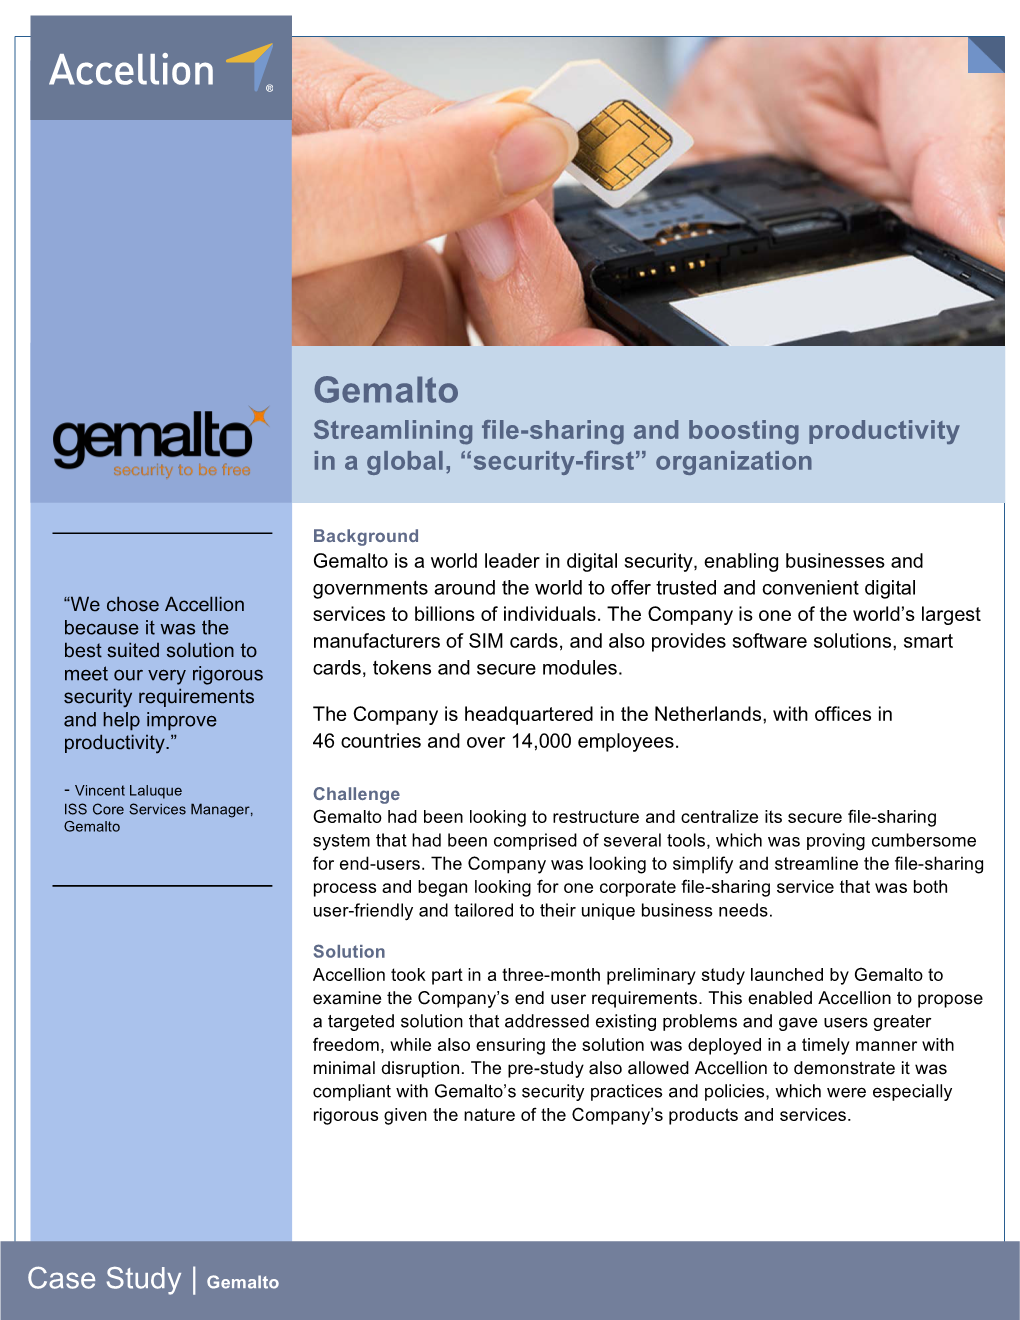 Gemalto Streamlining File-Sharing and Boosting Productivity in a Global, “Security-First” Organization